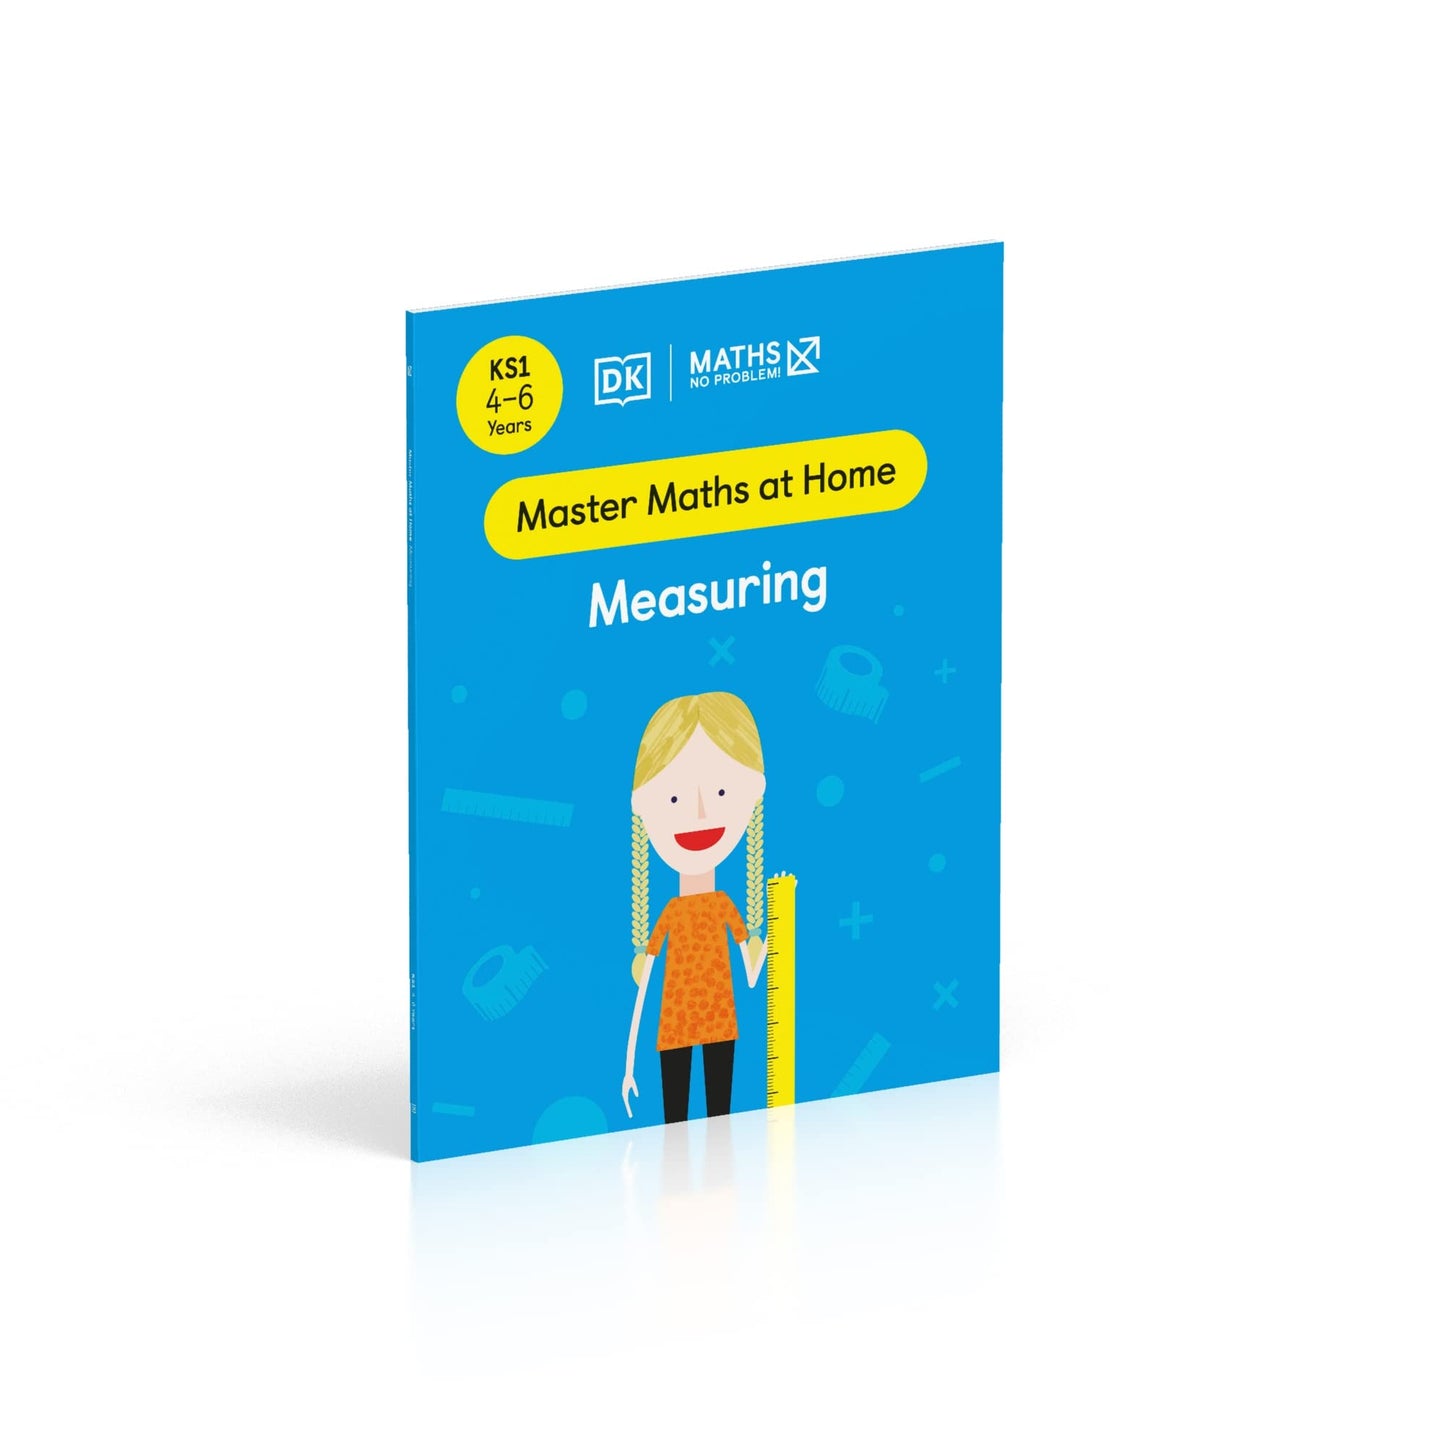 Maths ― No Problem! Measuring, Ages 4-6 (Key Stage 1) (Master Maths At Home)